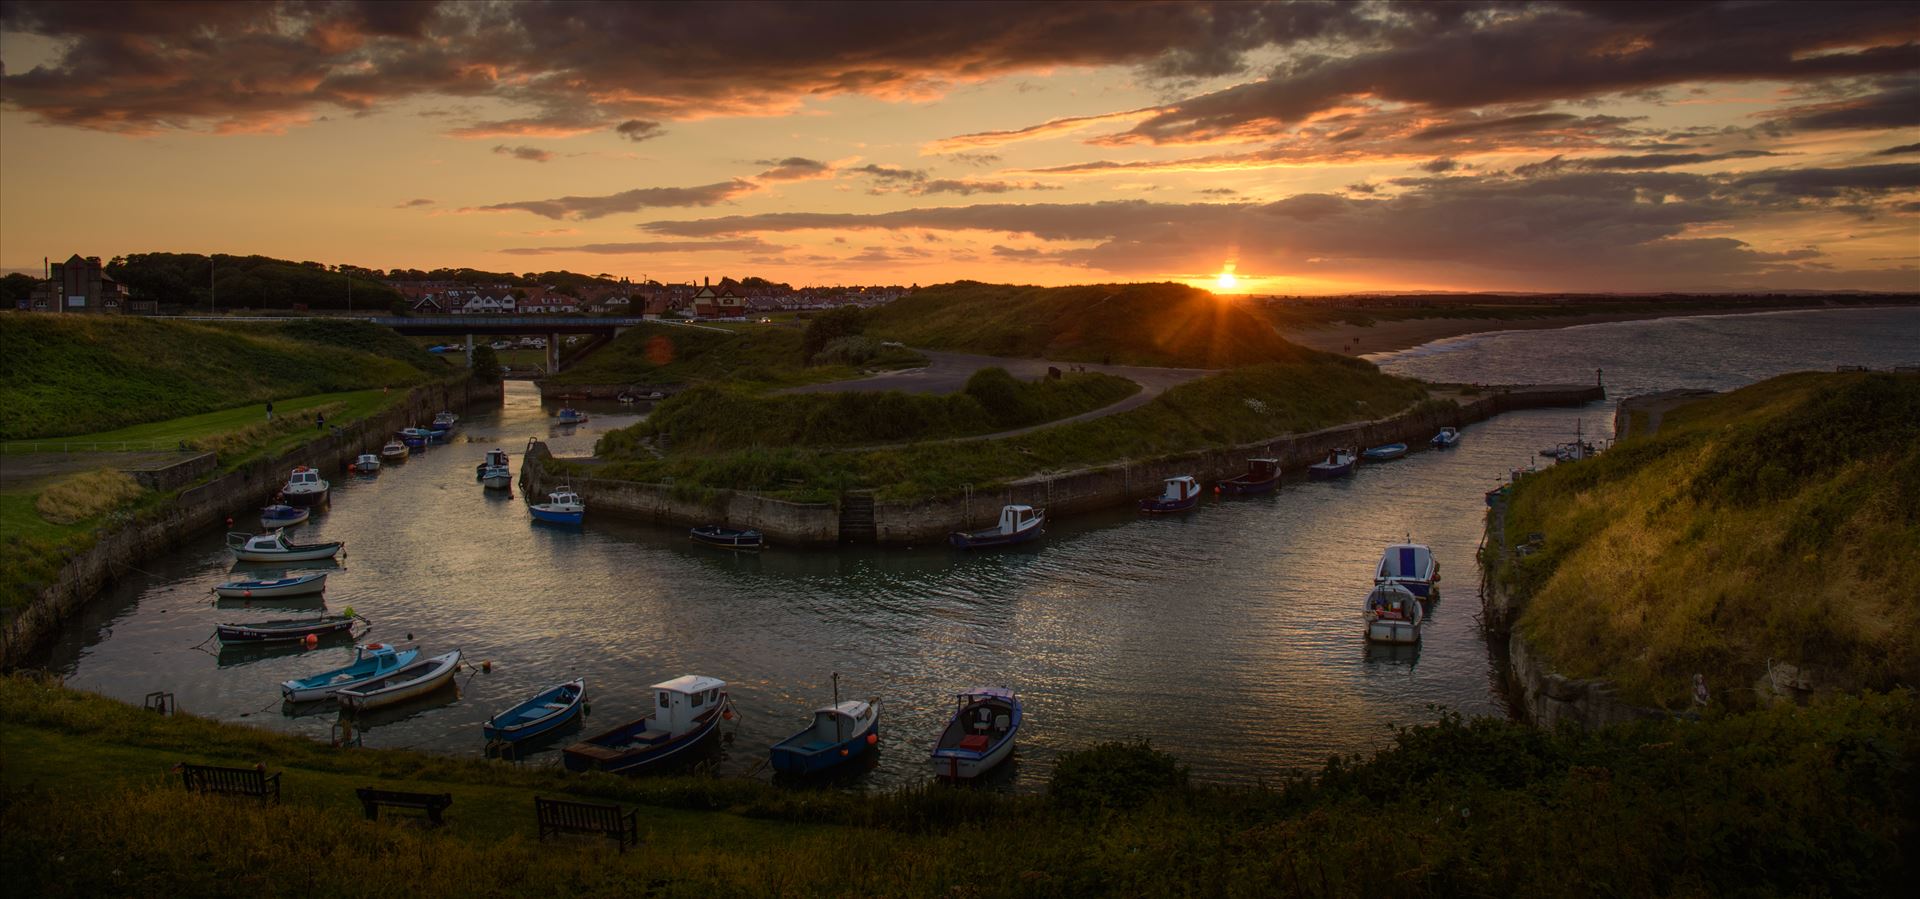 Sunset at the harbour - Sunset at Seaton Sluice harbour, Northumberland by philreay